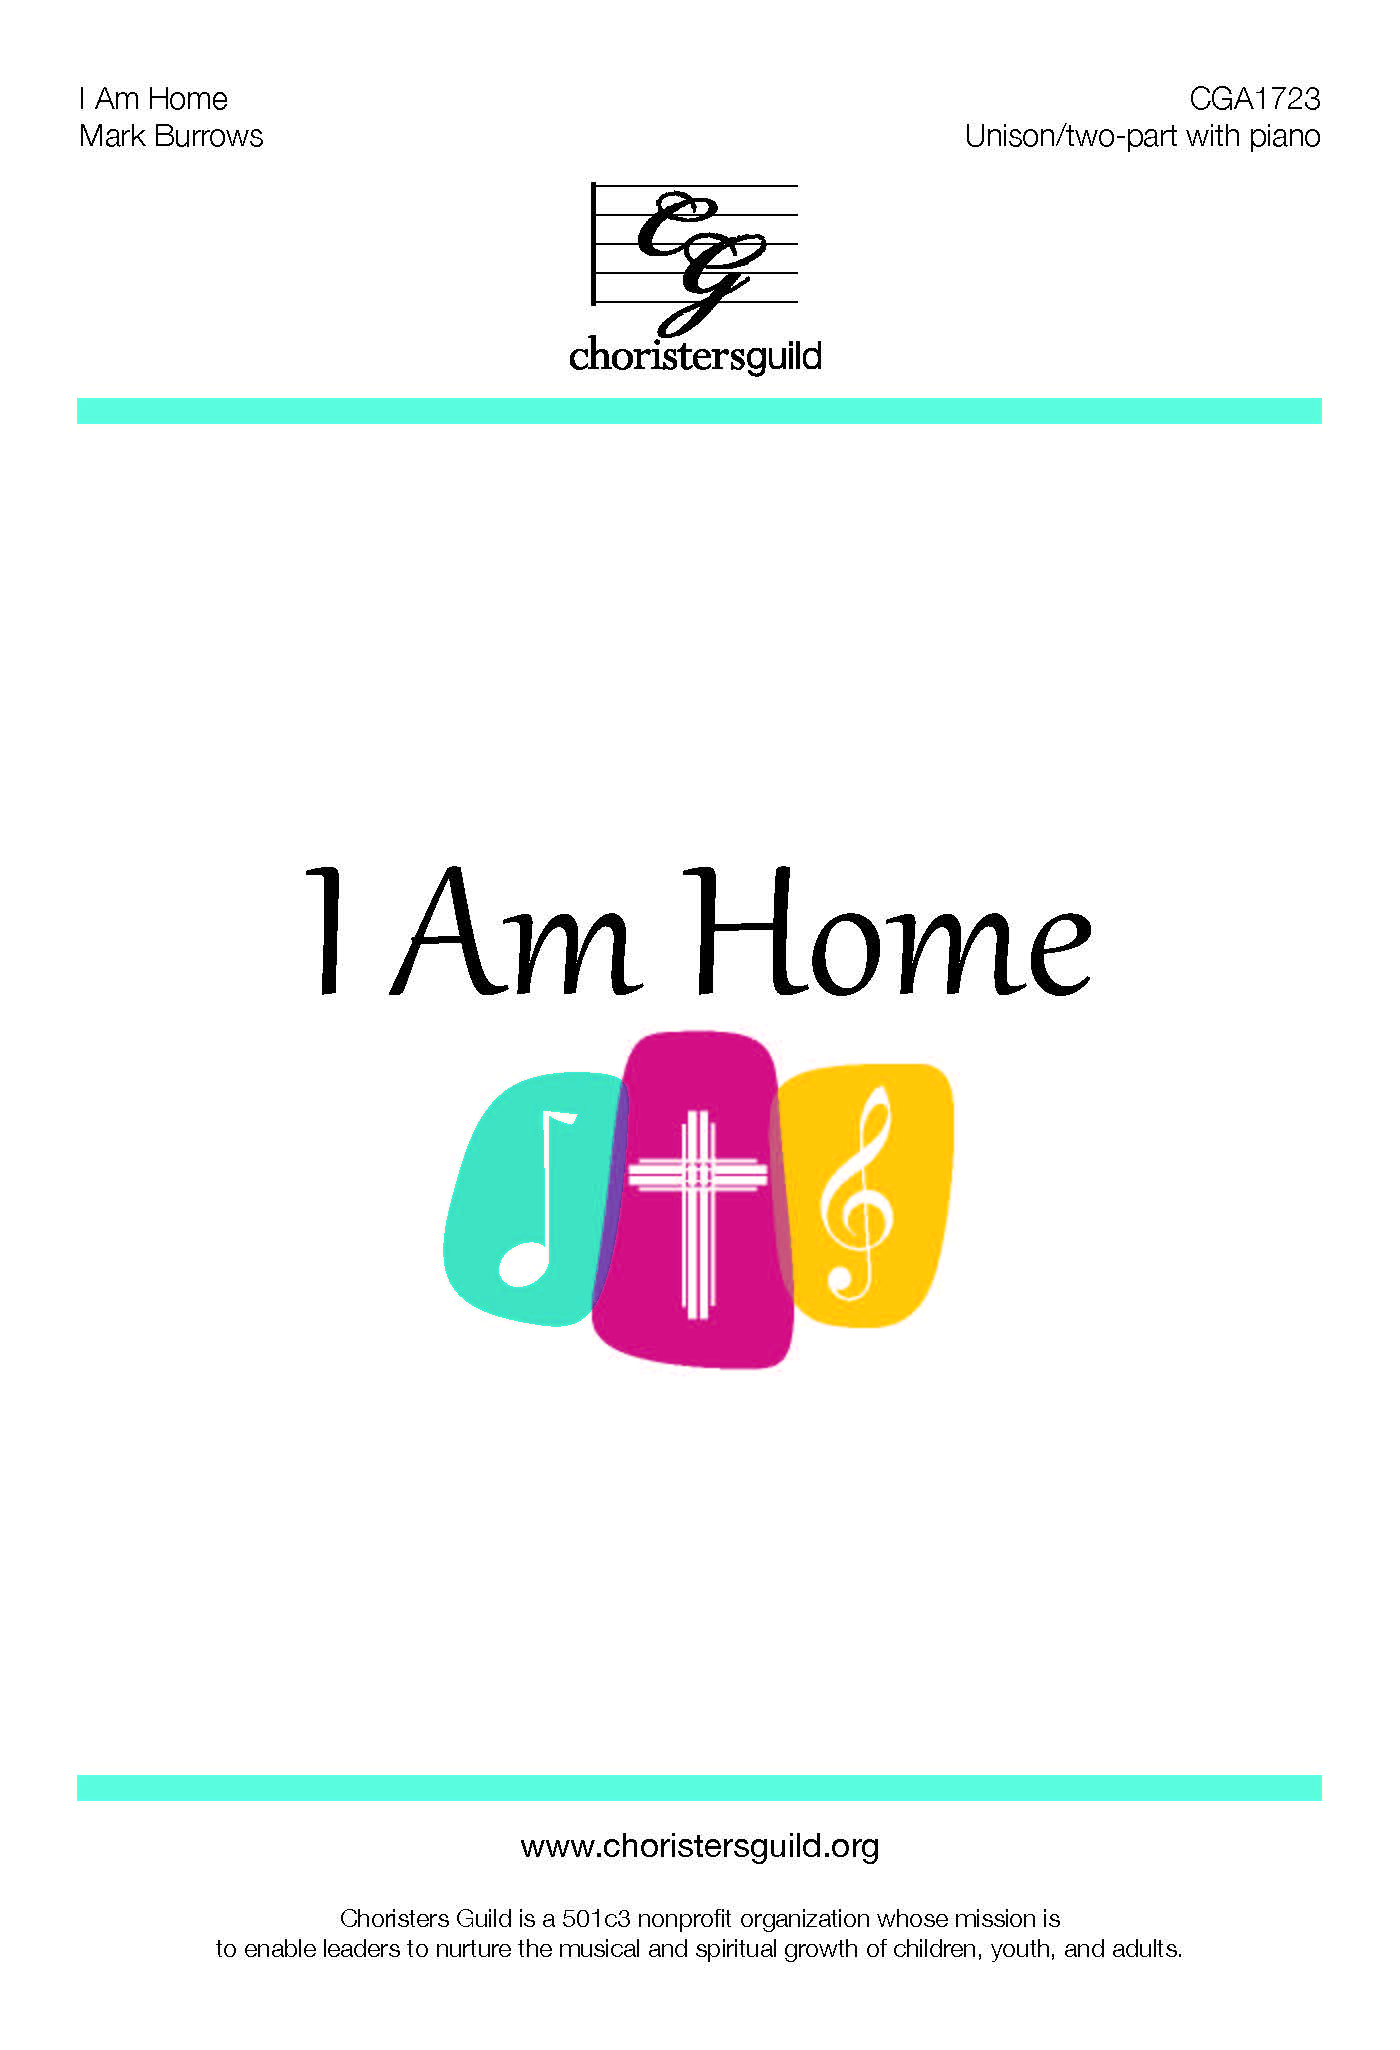 I Am Home - Unison/Two-part